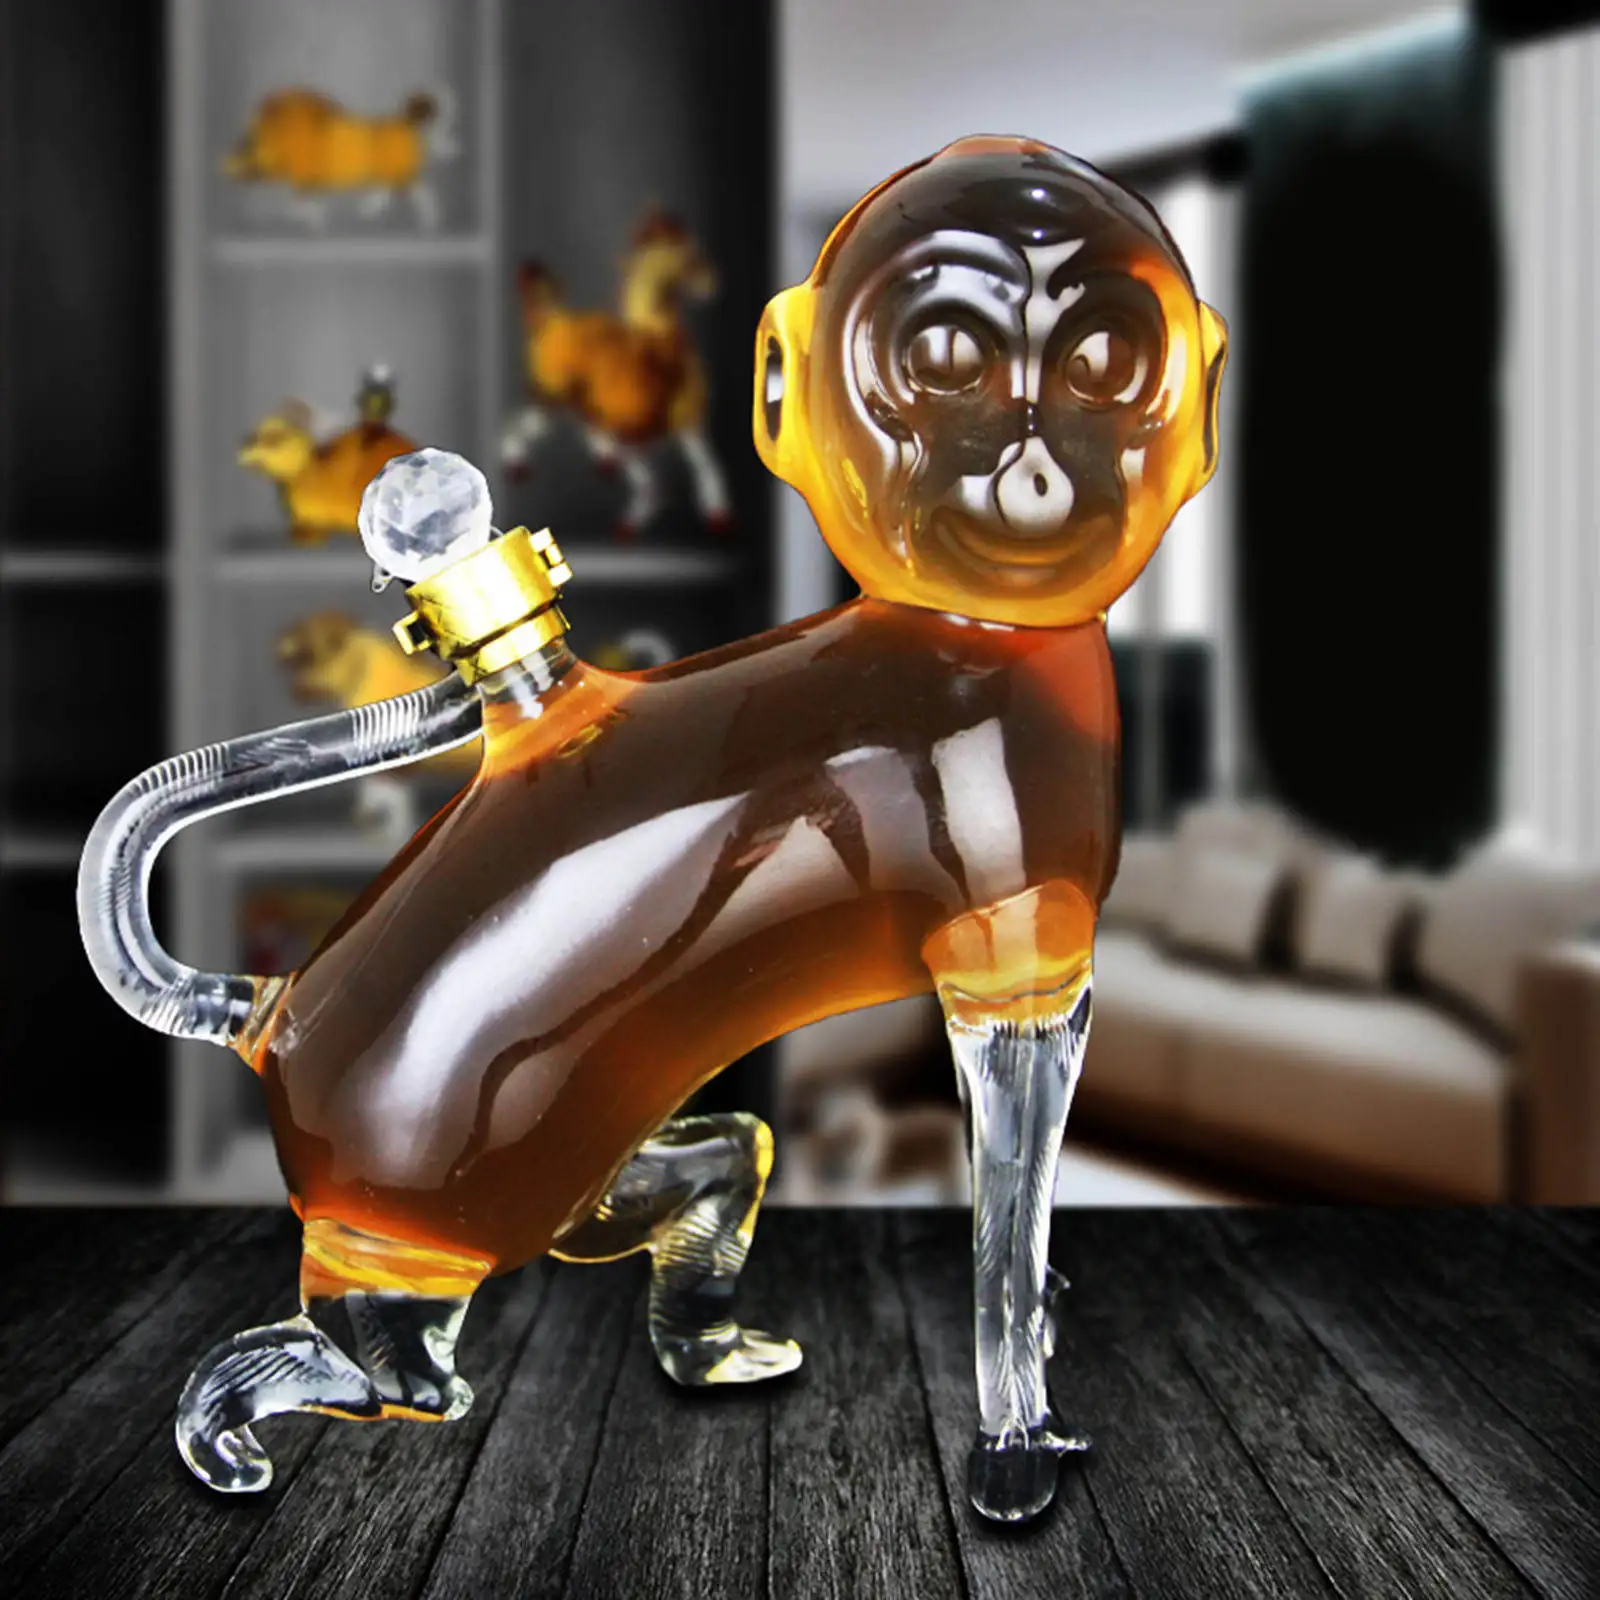 Monkey Design Whisky Decanter Transparent Liquor Decanter for Xmas Present Holiday Gifts